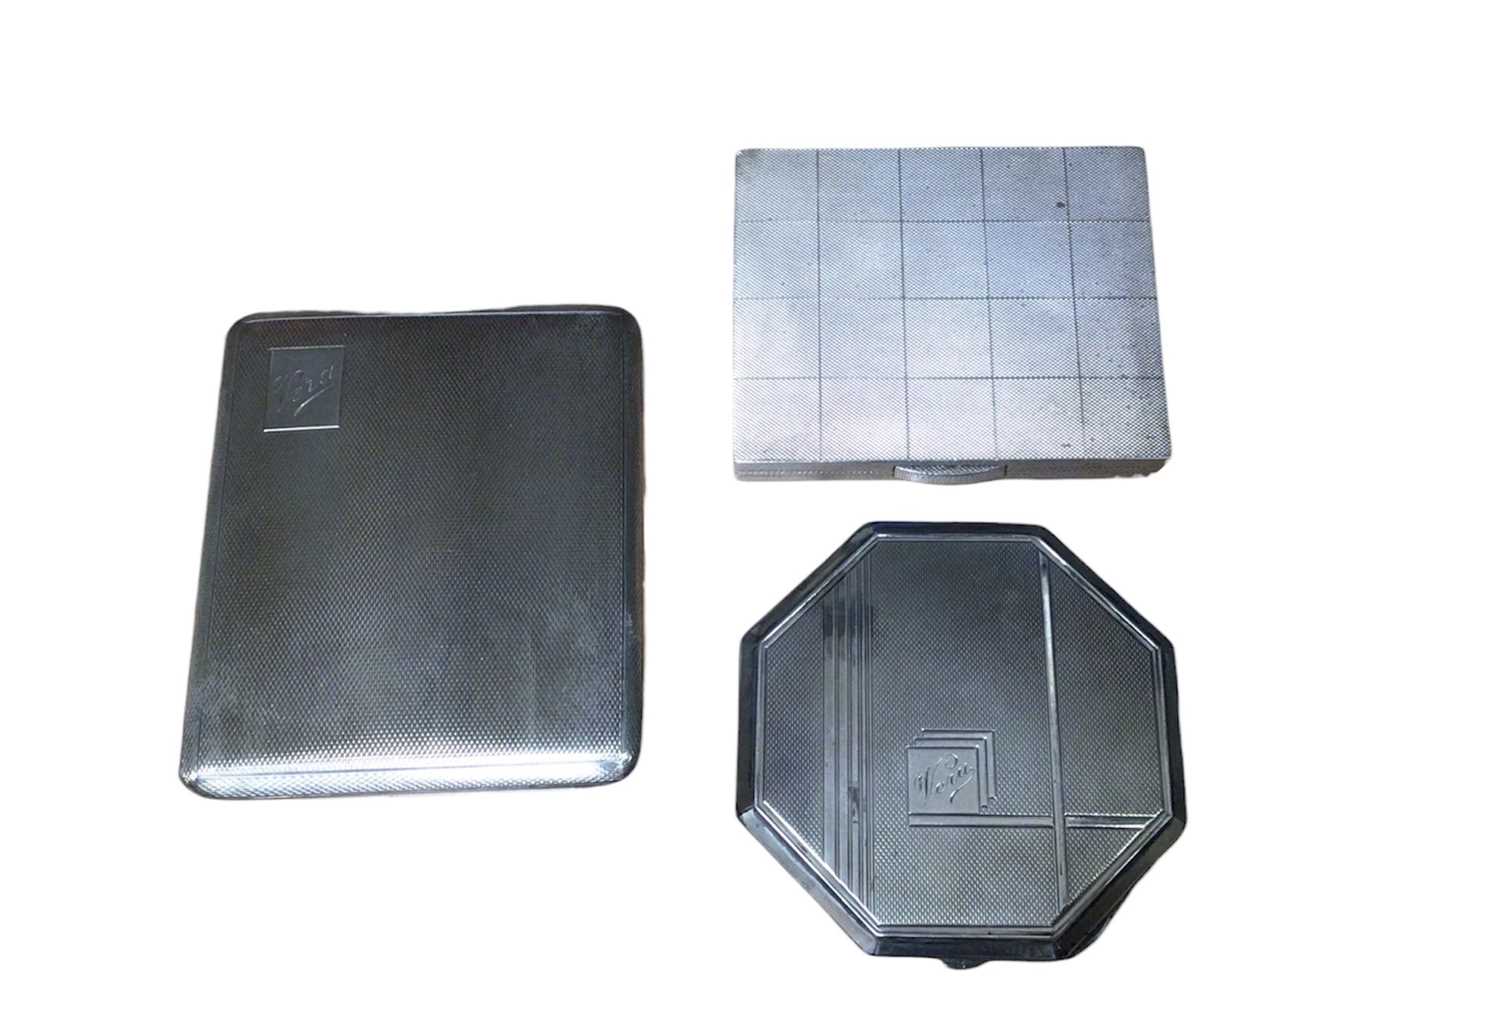 Lot 25 - 1930s silver octagonal powder compact, 1930s silver cigarette case with square engine turned decoration and one other silver cigarette case (3)